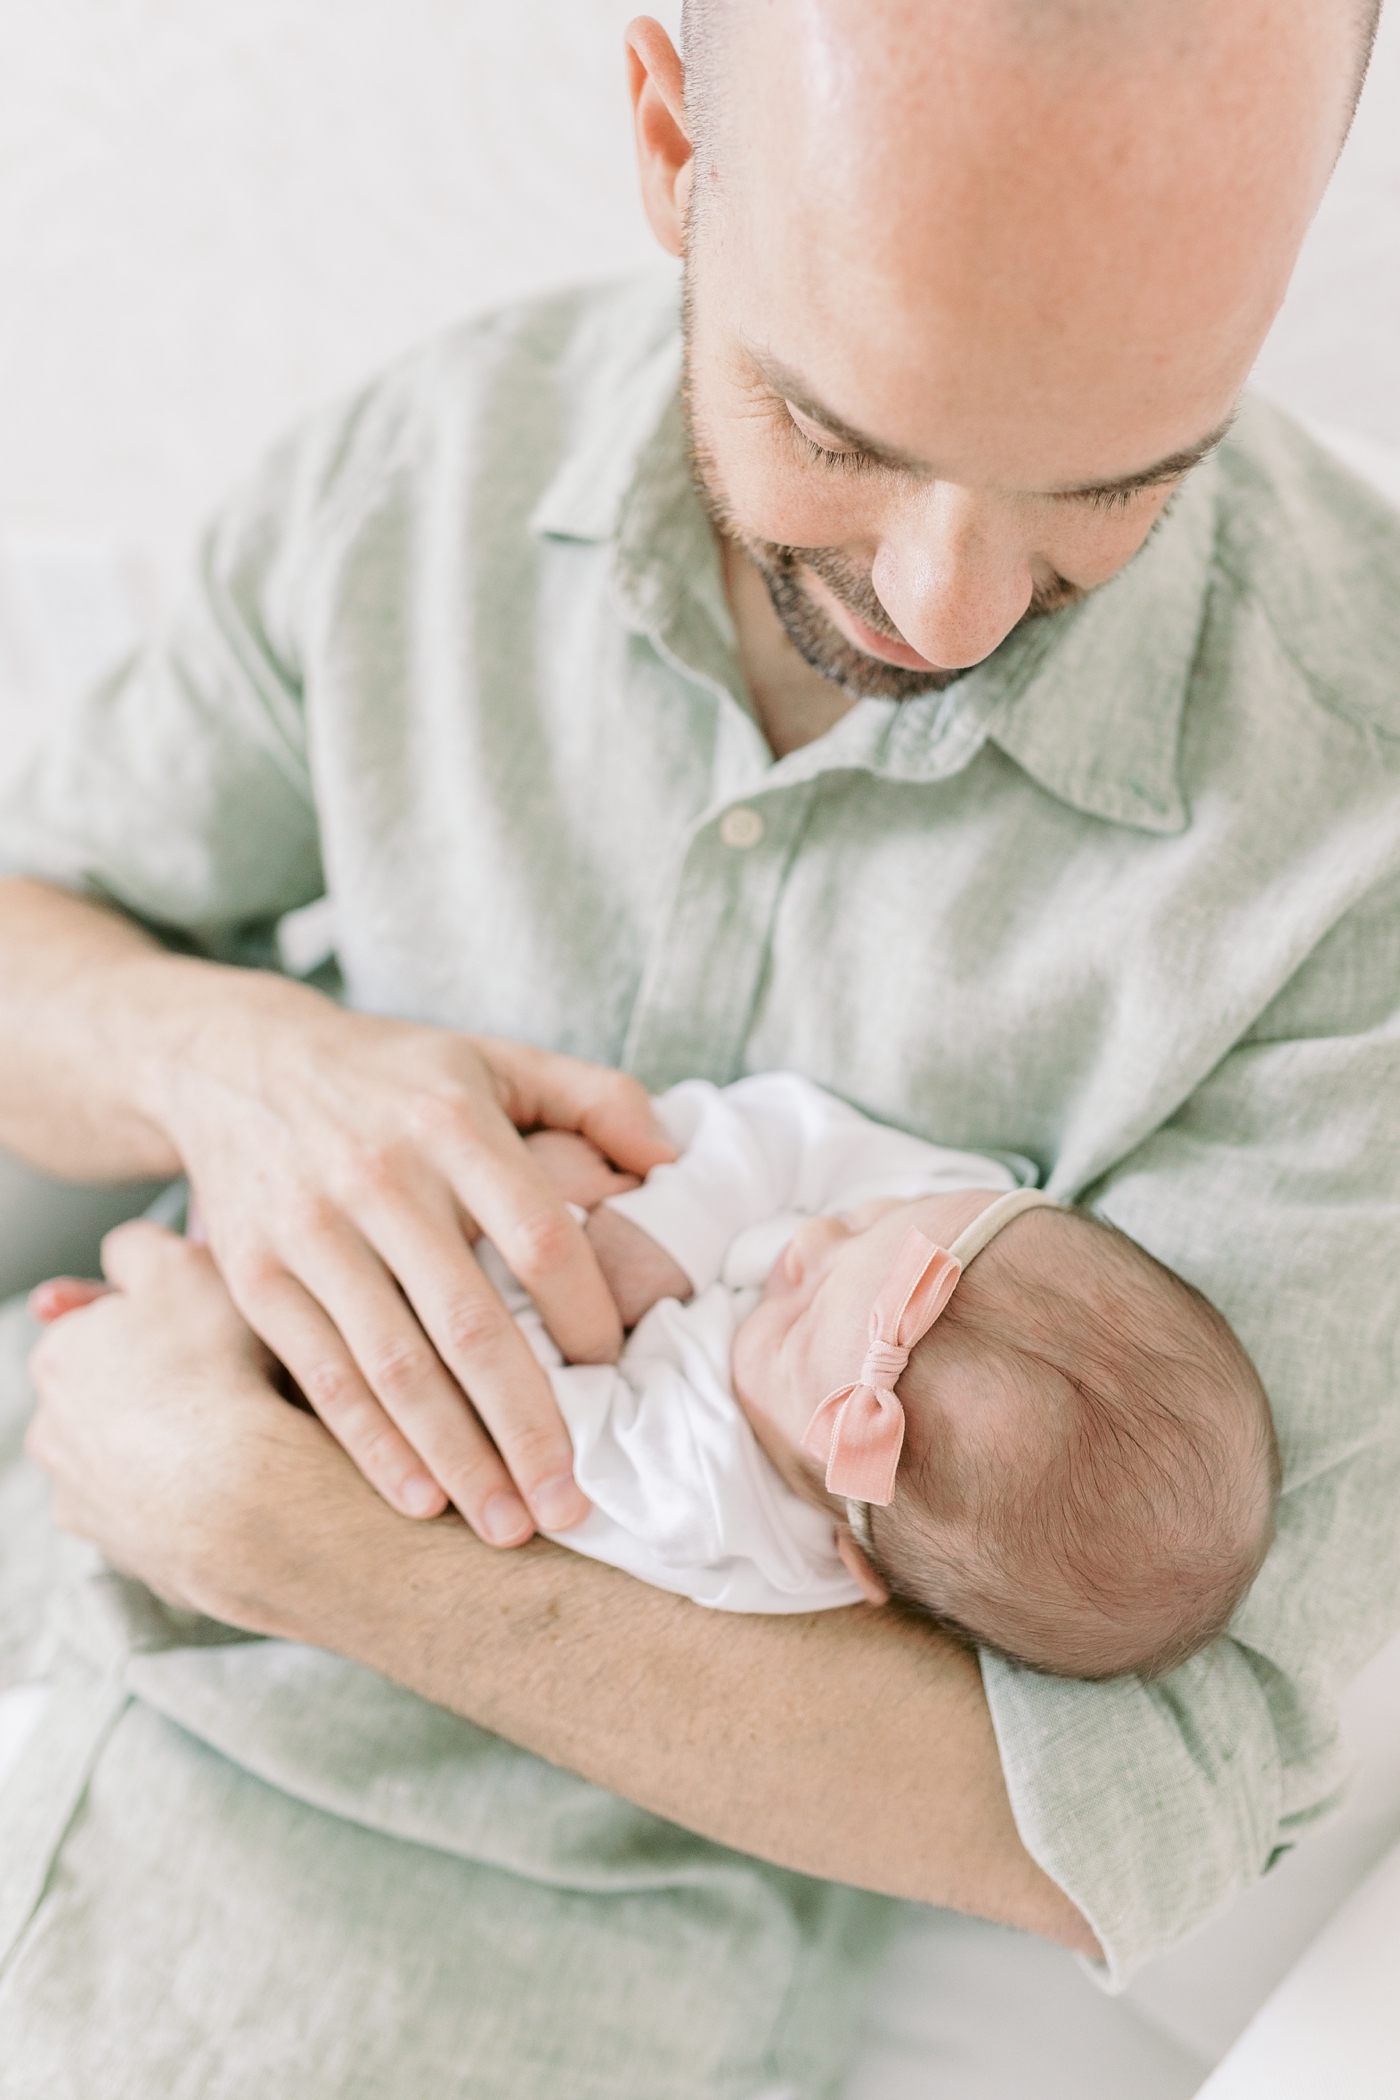 Dad in green shirt holding newborn baby girl with pink bow | Photo by Caitlyn Motycka Photography.